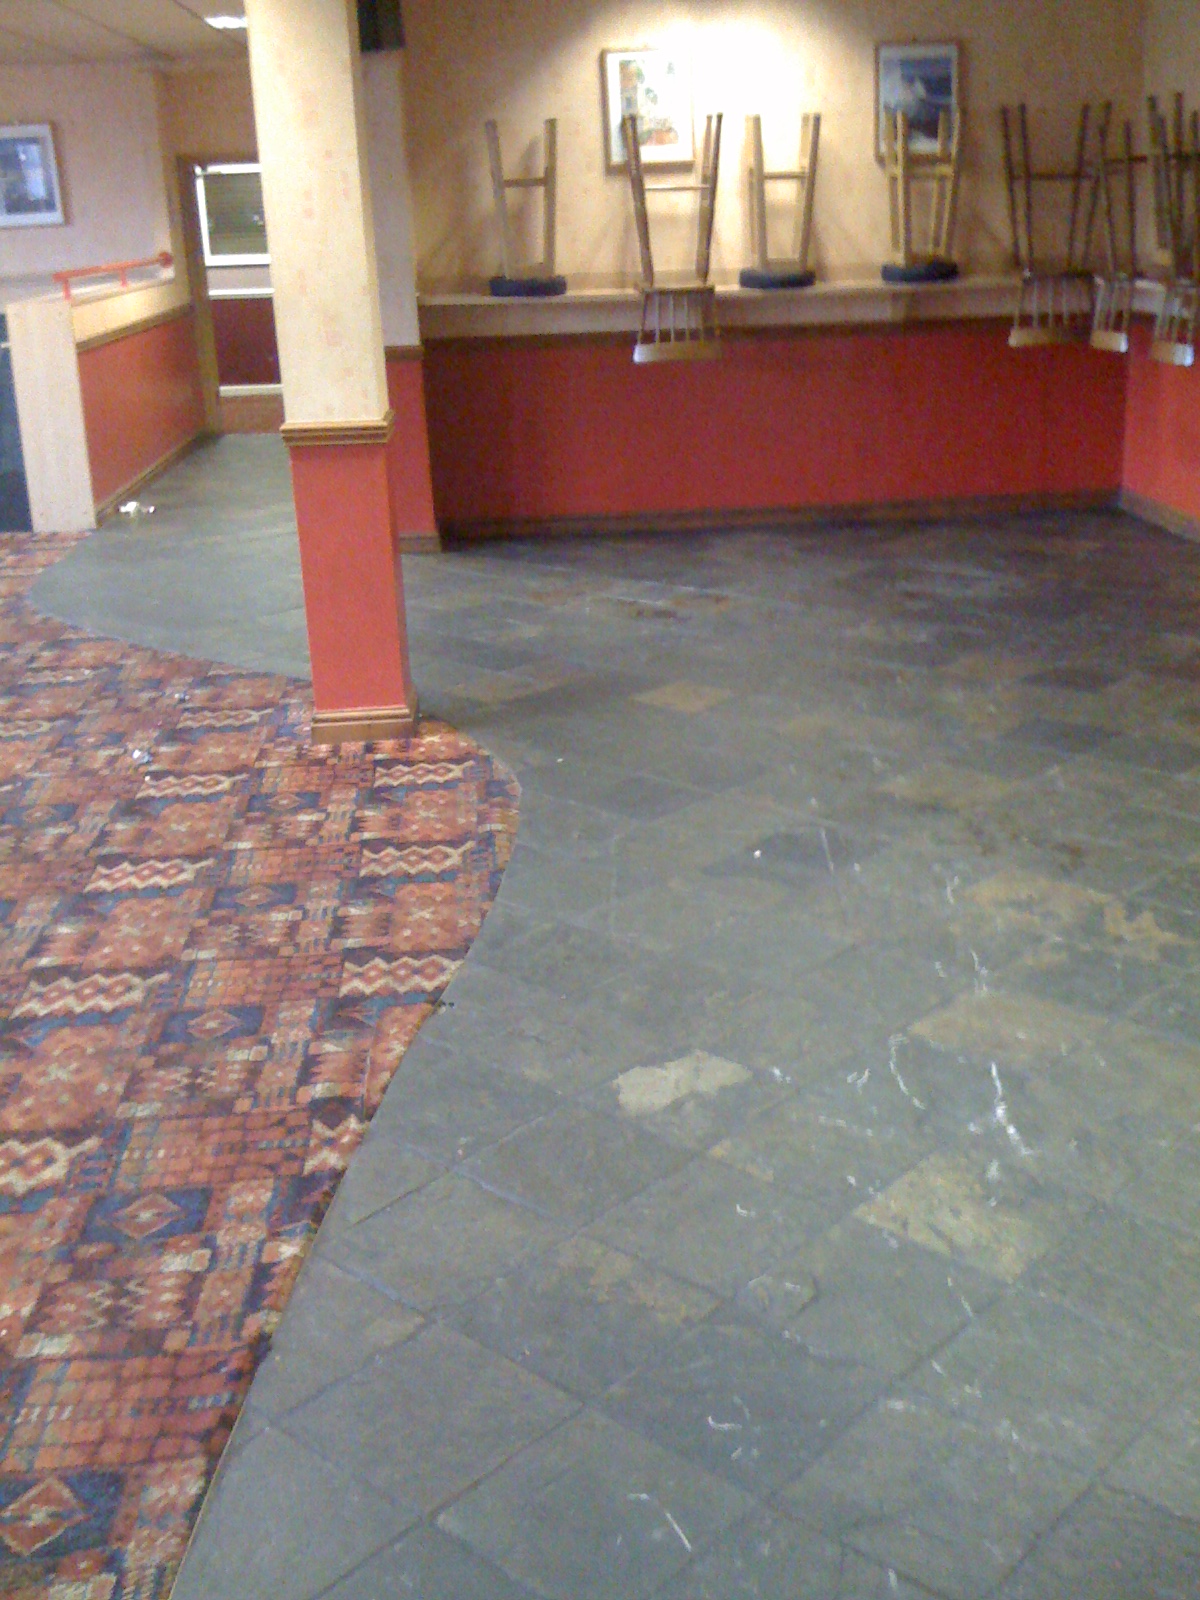 Slate Floor in a workings mens club in desperate need of a clean and seal